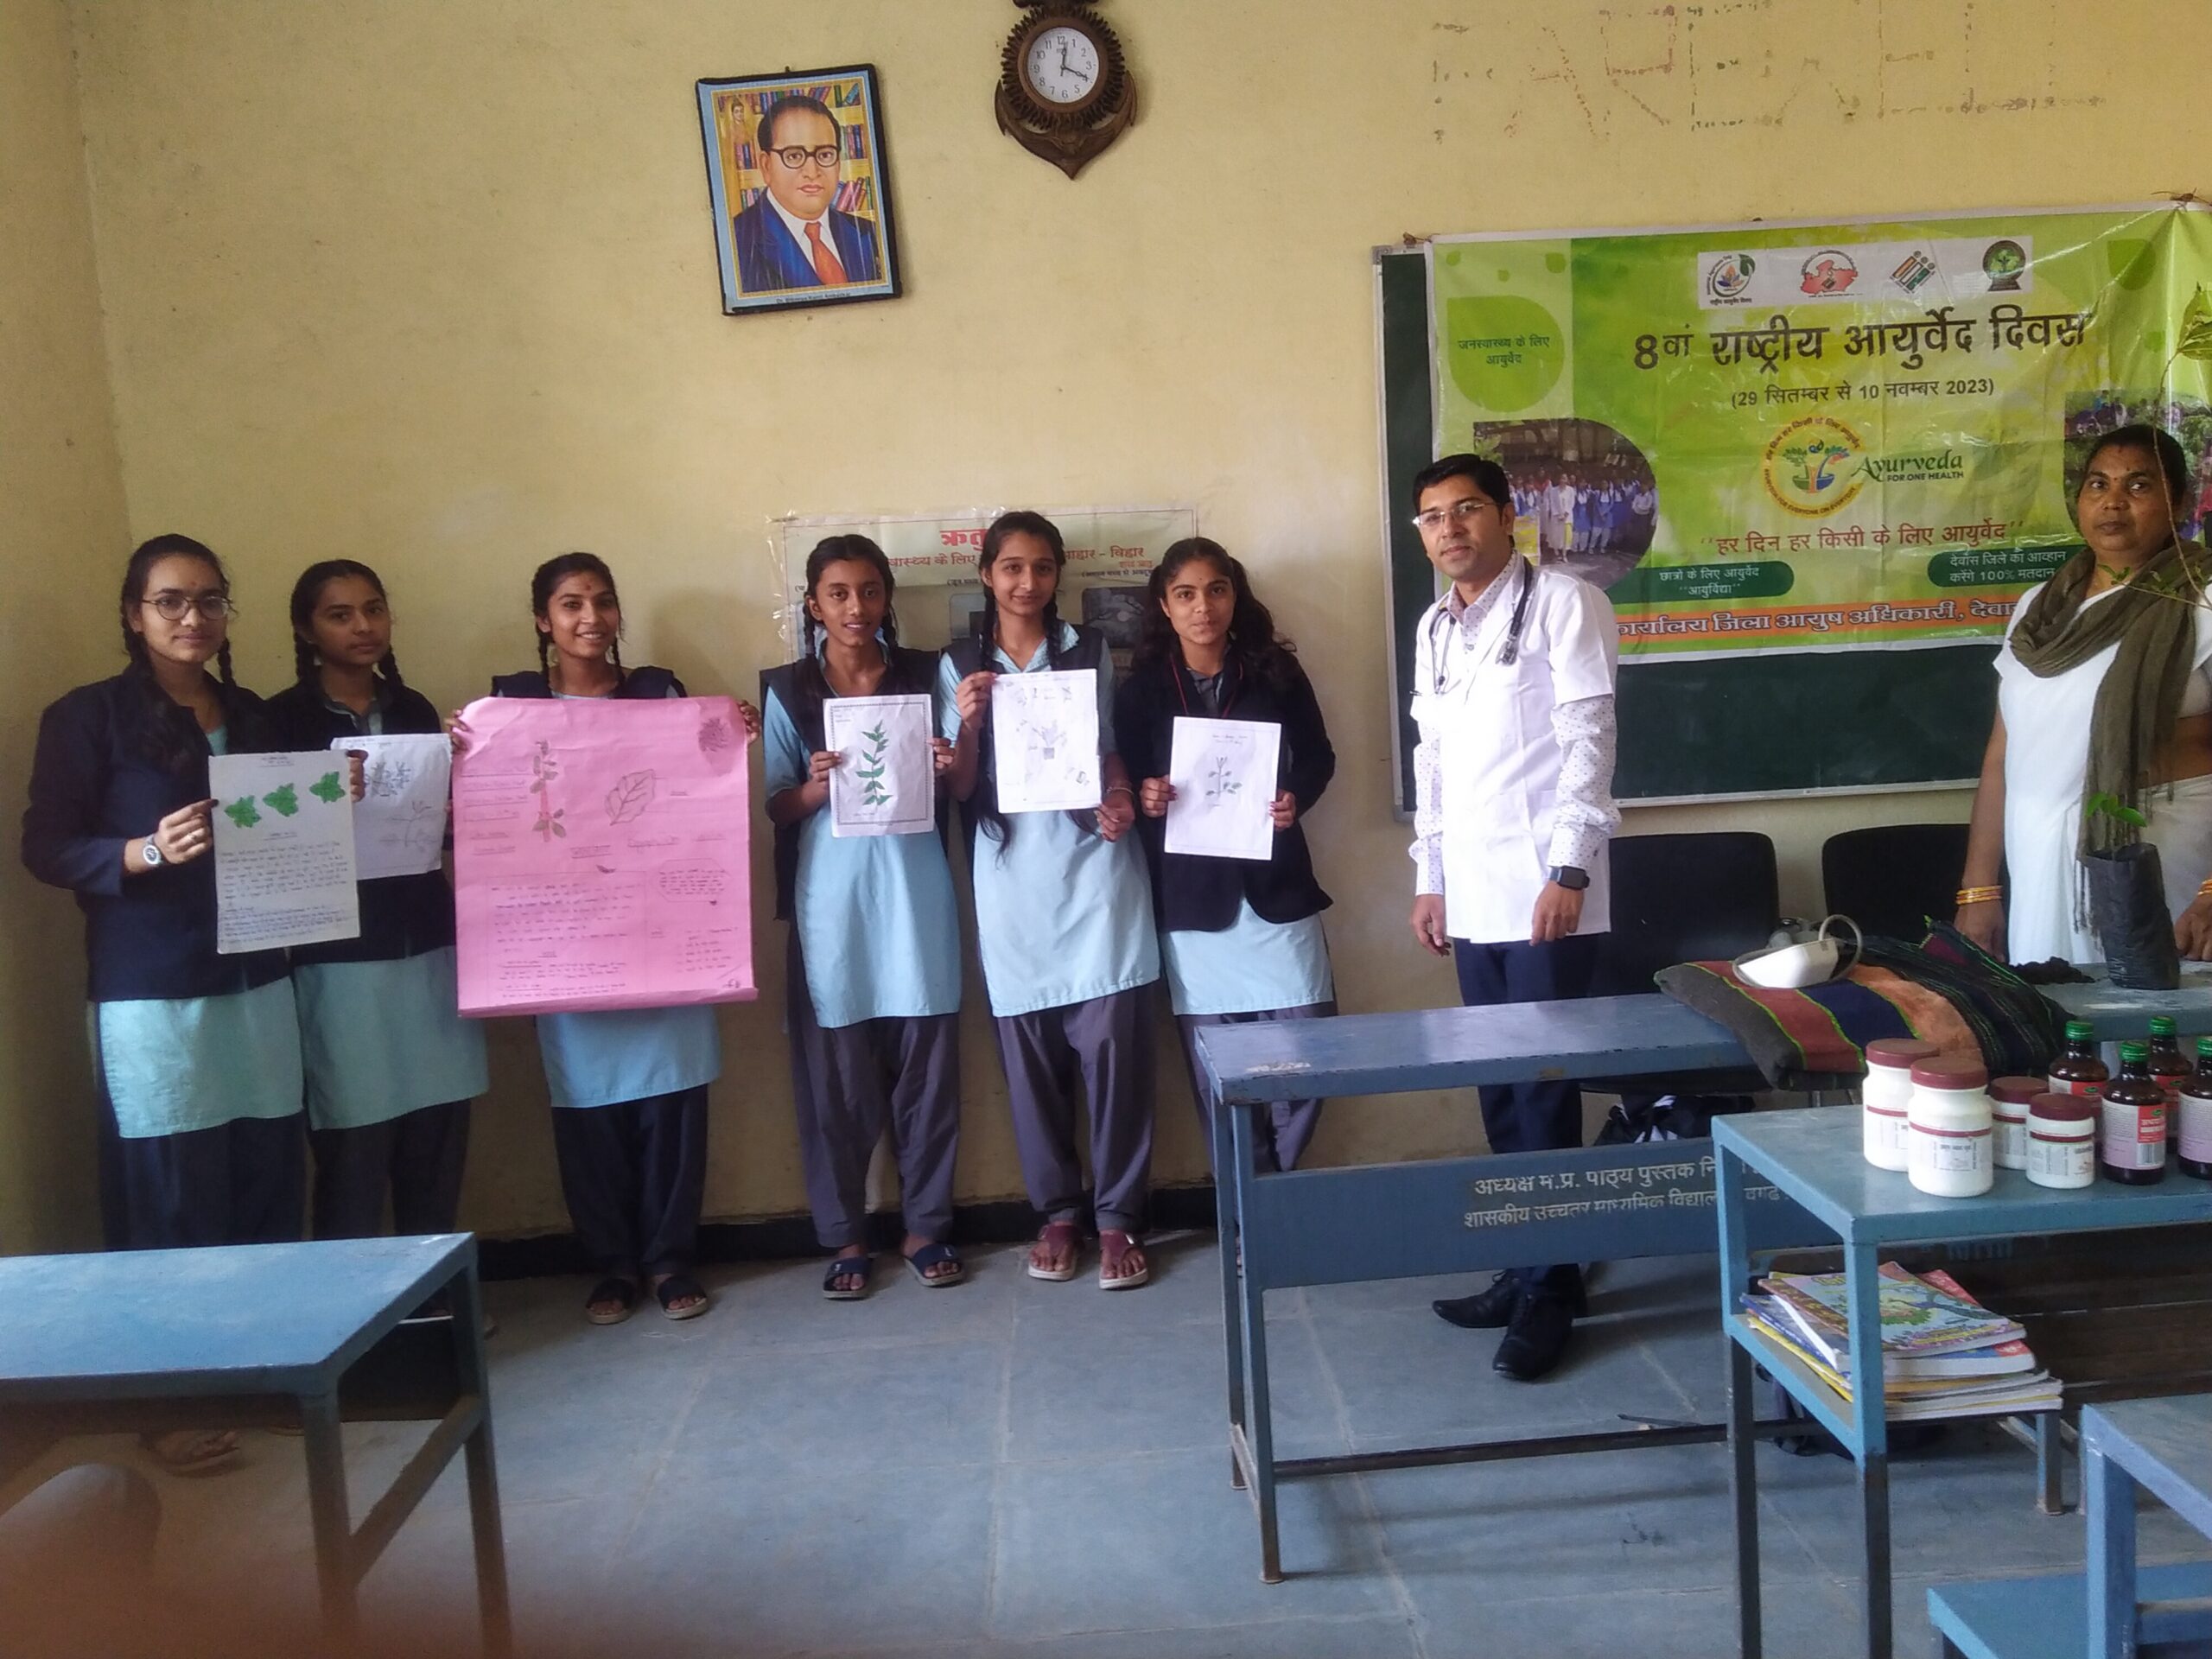 Health camp held in govt middle school Deogarh on theme of use of ayurved in our daily life.general awareness of local ayurvedic medicinal plants with benefits of yoga1